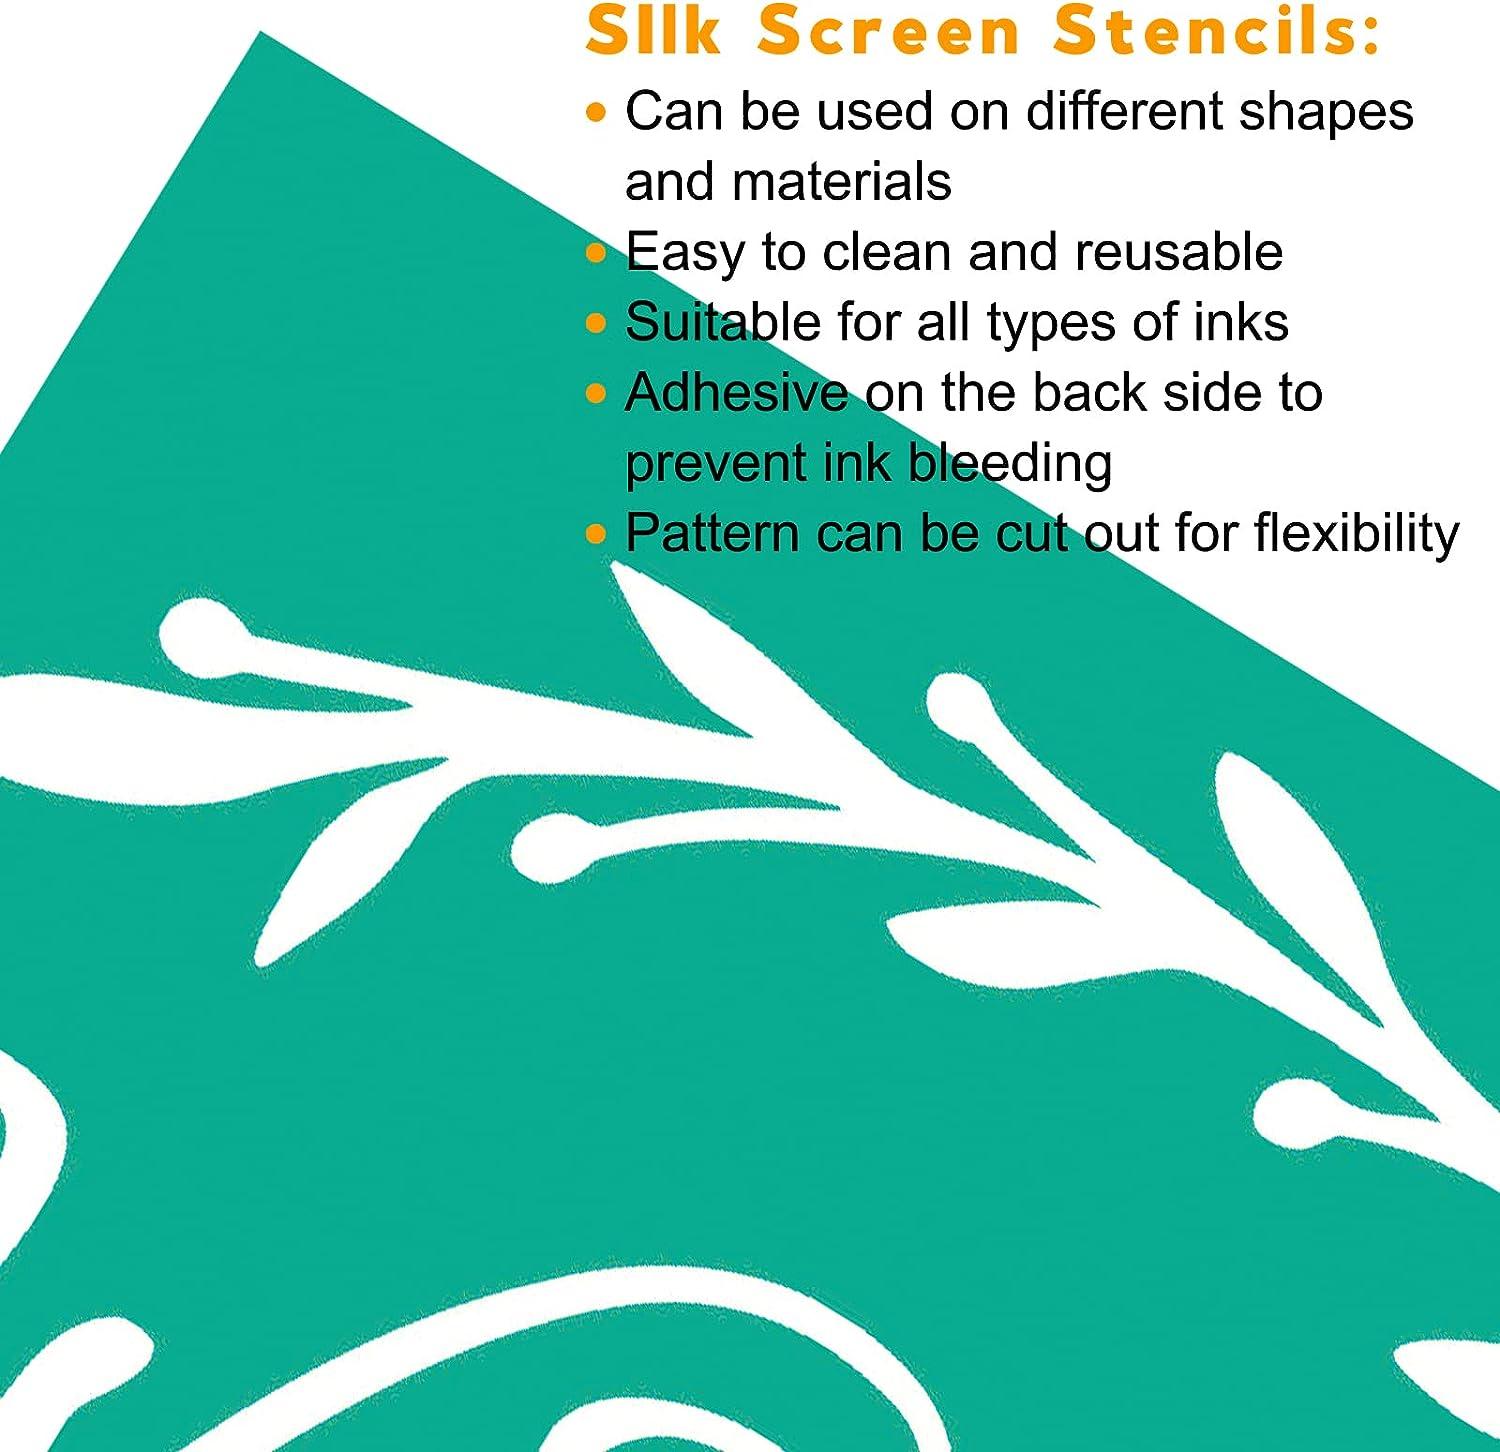 BOOLOOEN Silk Screen Stencils Self-Adhesive Stencils Can be Applied Using  on Chalkboard, Home Decor Adhesive Silkscreen, Reusable Silk Screen  Stencil